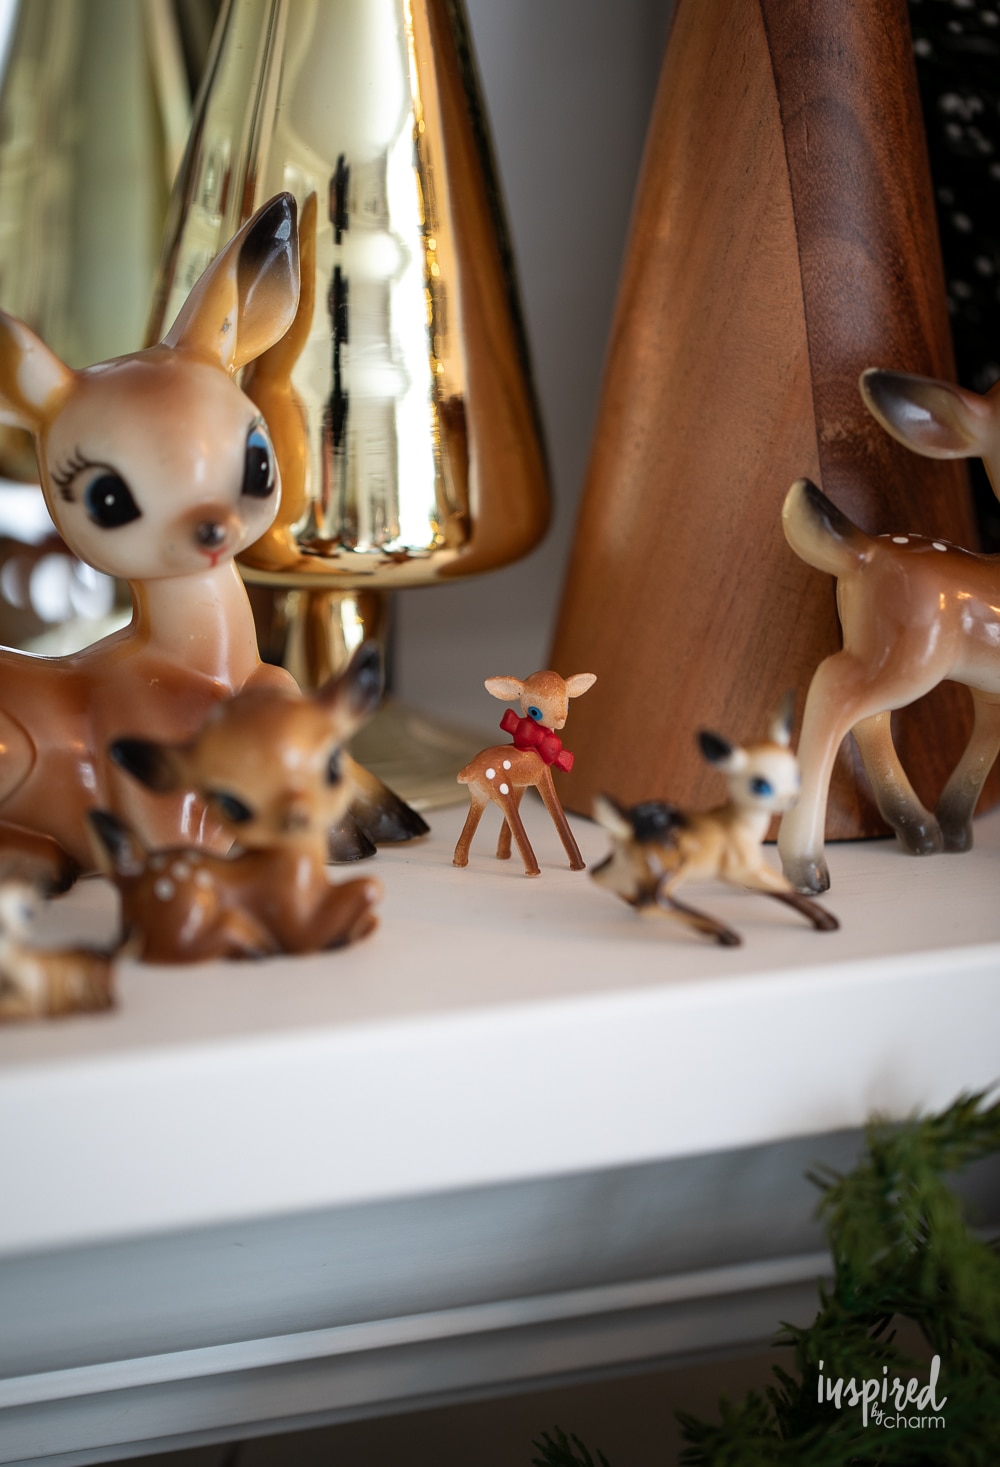 sweet plastic fawn figures used for Christmas decor.